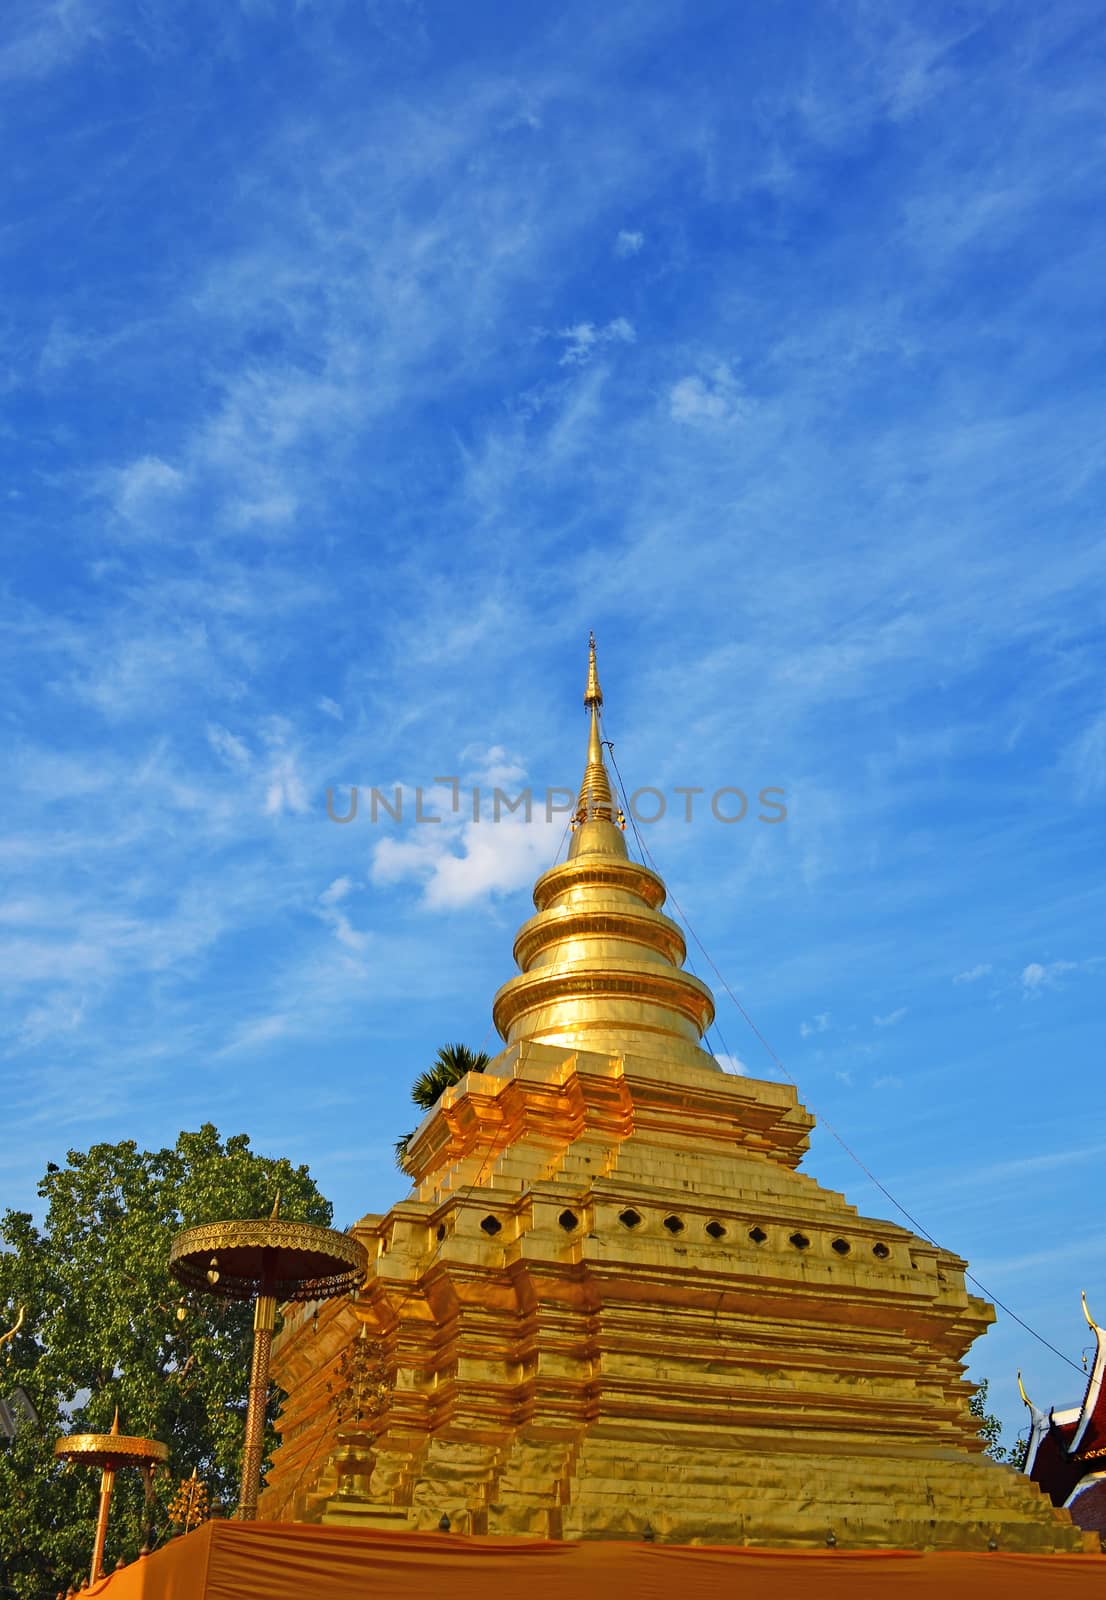 Phra That Sri Jom Thong , Series 1_7, Golden Pagoda with Cloud a by kobfujar